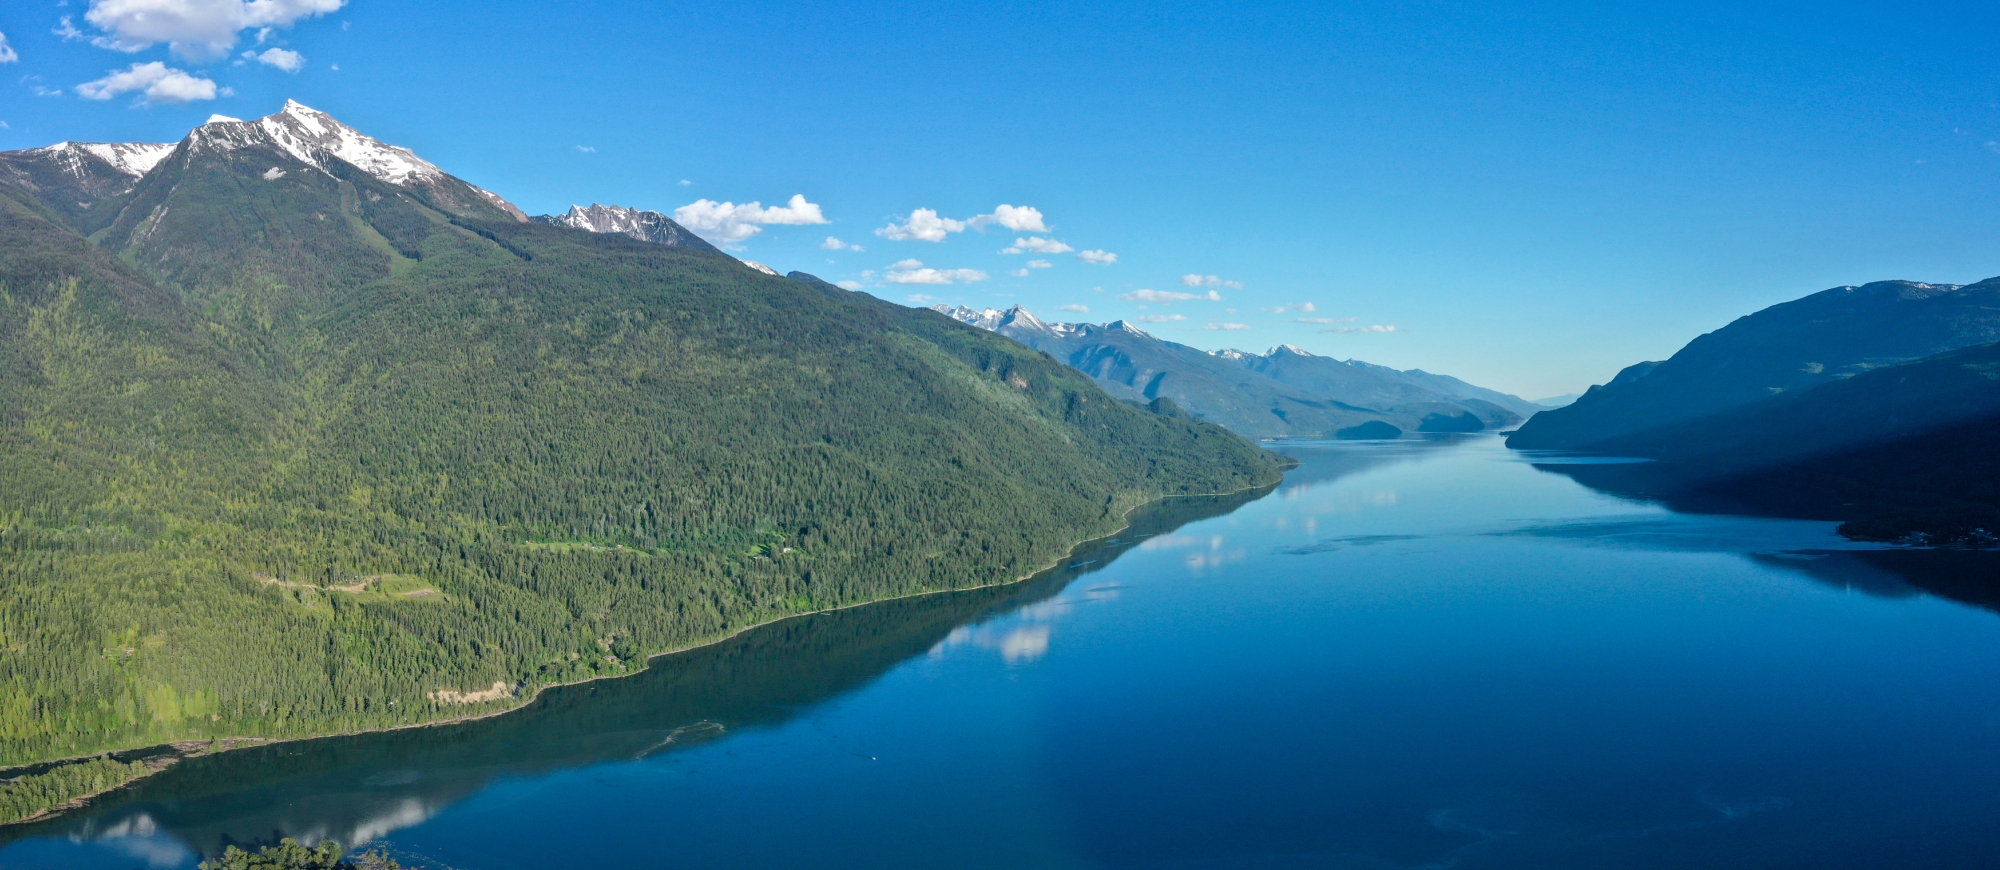 Aerial view of Kootenay Lake and mountains covered with green trees